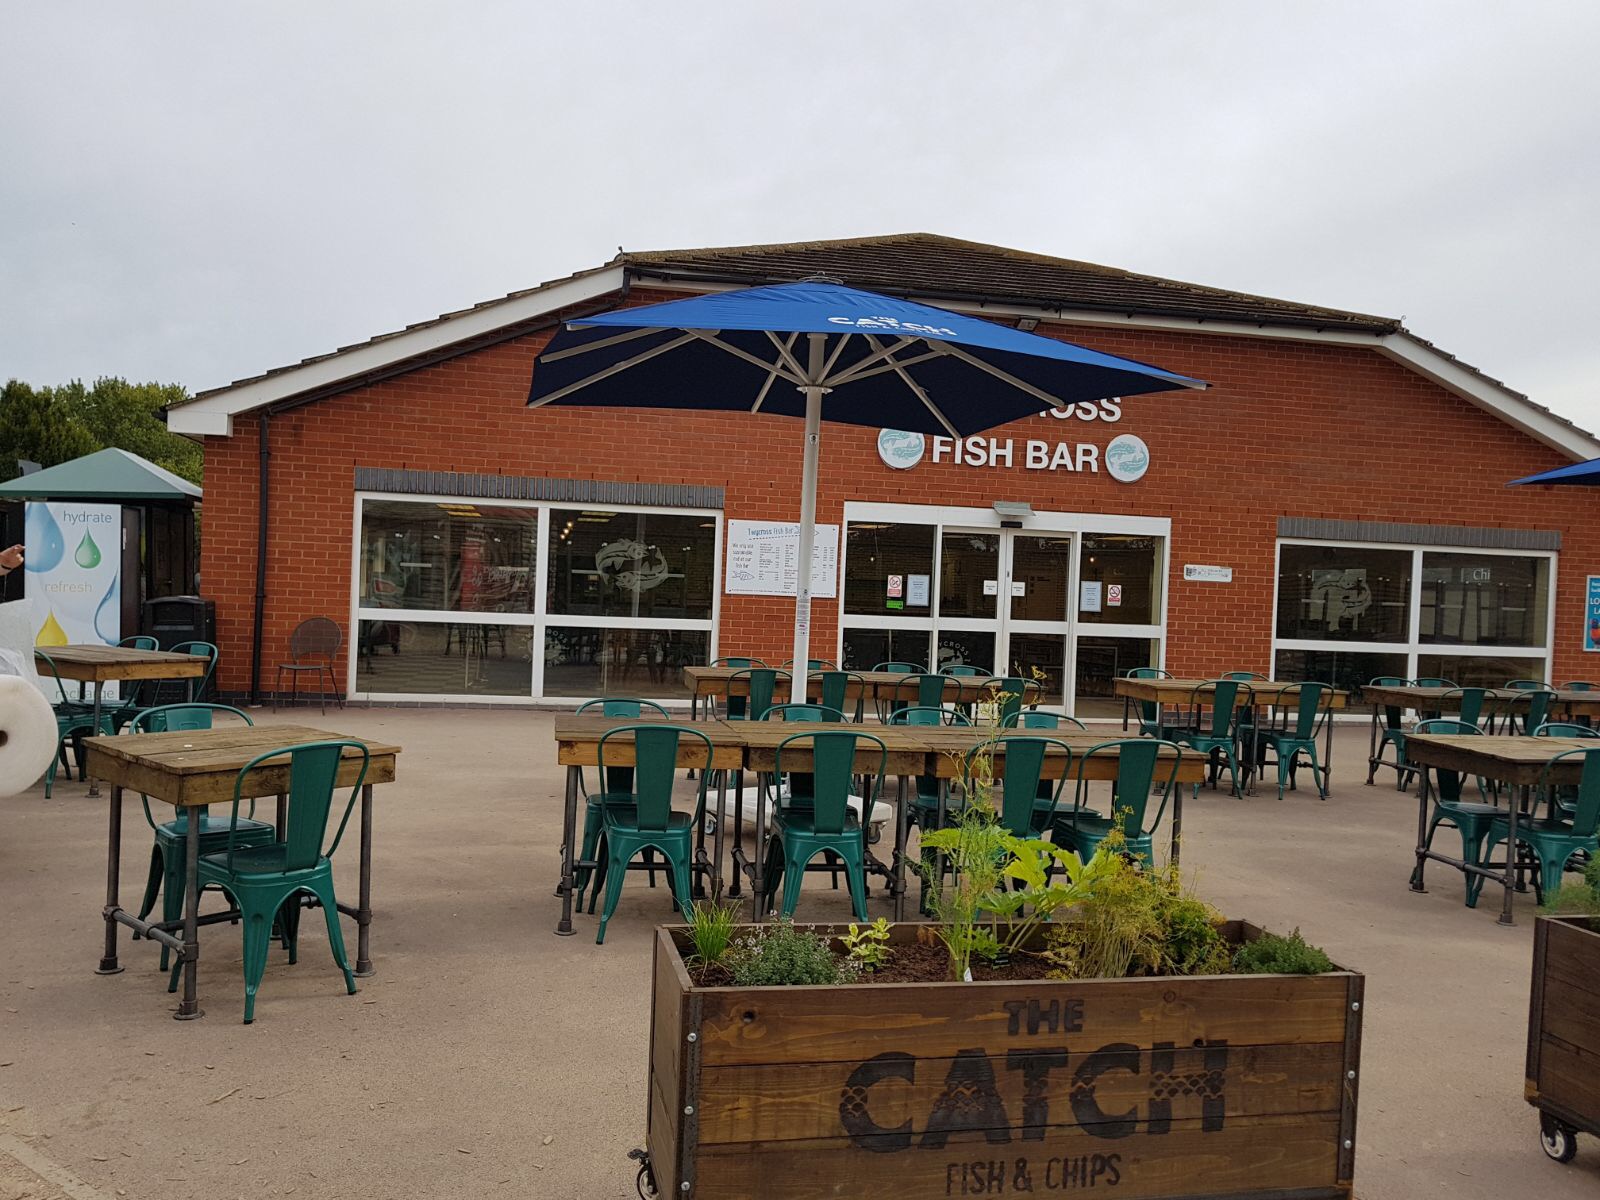 The Catch Fish & Chip Shop at Twycross Zoo - Baylis Planters, Giant Umbrellas and Handmade Wooden Table Tops